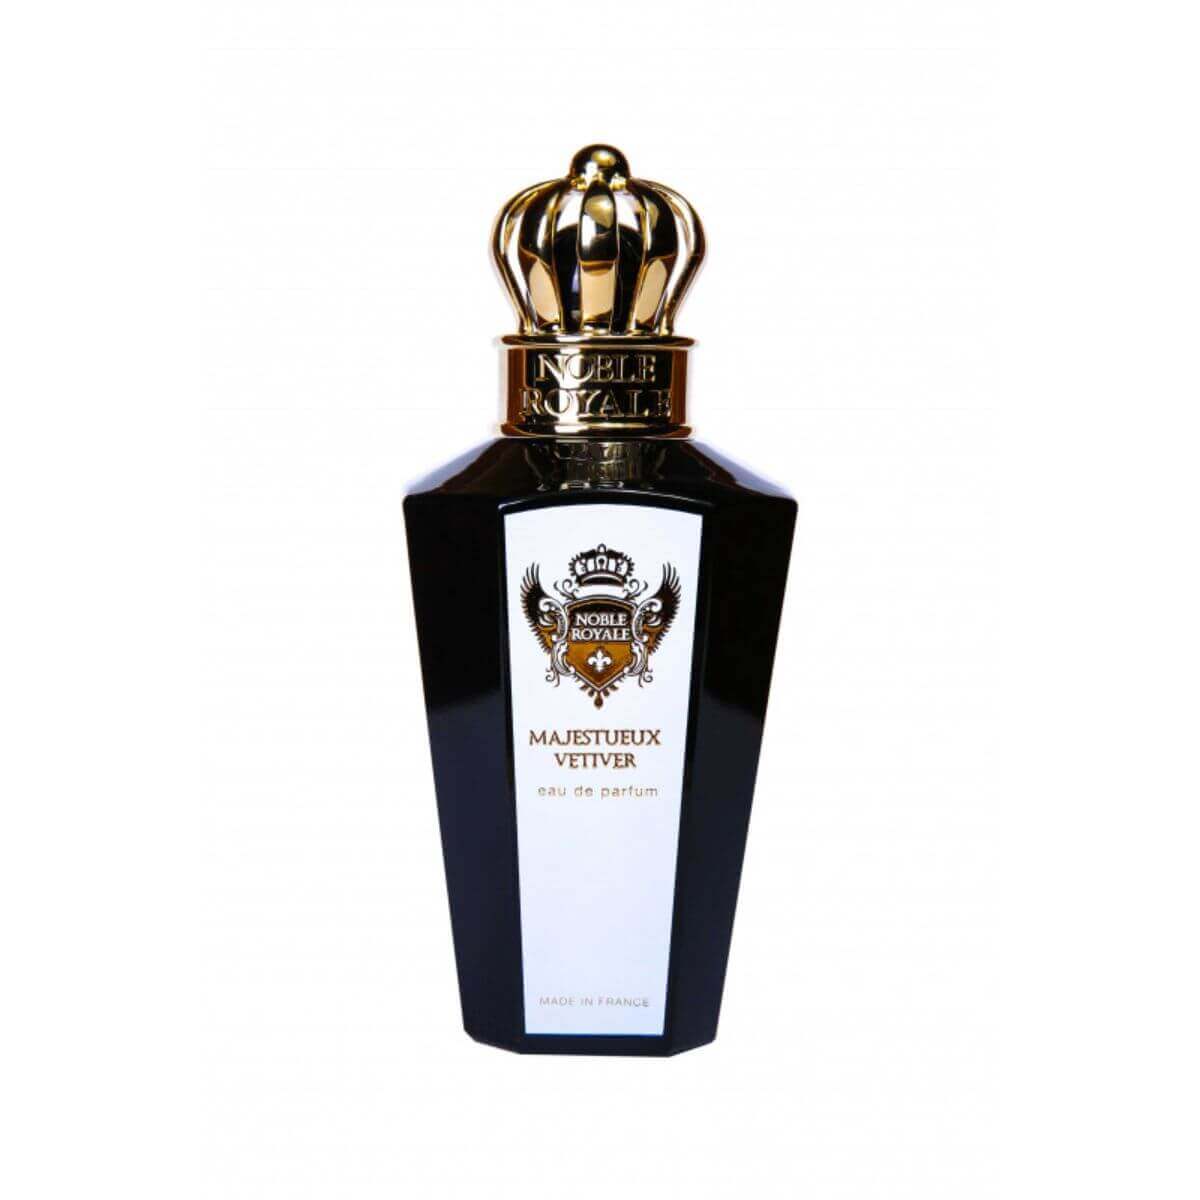 Noble Royale - Majestueux Vetiver, A Royale, Masculine, And Leathery Fragrance For Mena Majestueux Scent Inspired By The Refined, Courageous And Wise King Of Russia Alexander Ia Fascinating And Mesmerizing Perfume With Its Mysterious Touchthe Luxurious Notes Of Burning Cardamom Along With The Vibrant Aromas Of Vanilla Create A Velvety Romantic Fragrance.Top Notes: Cardamom, Anis, GingerHeart Notes: Cloves, Rose, CinnamonBase Notes: Vanilla, Cedar, Benzoin, Tobacco .